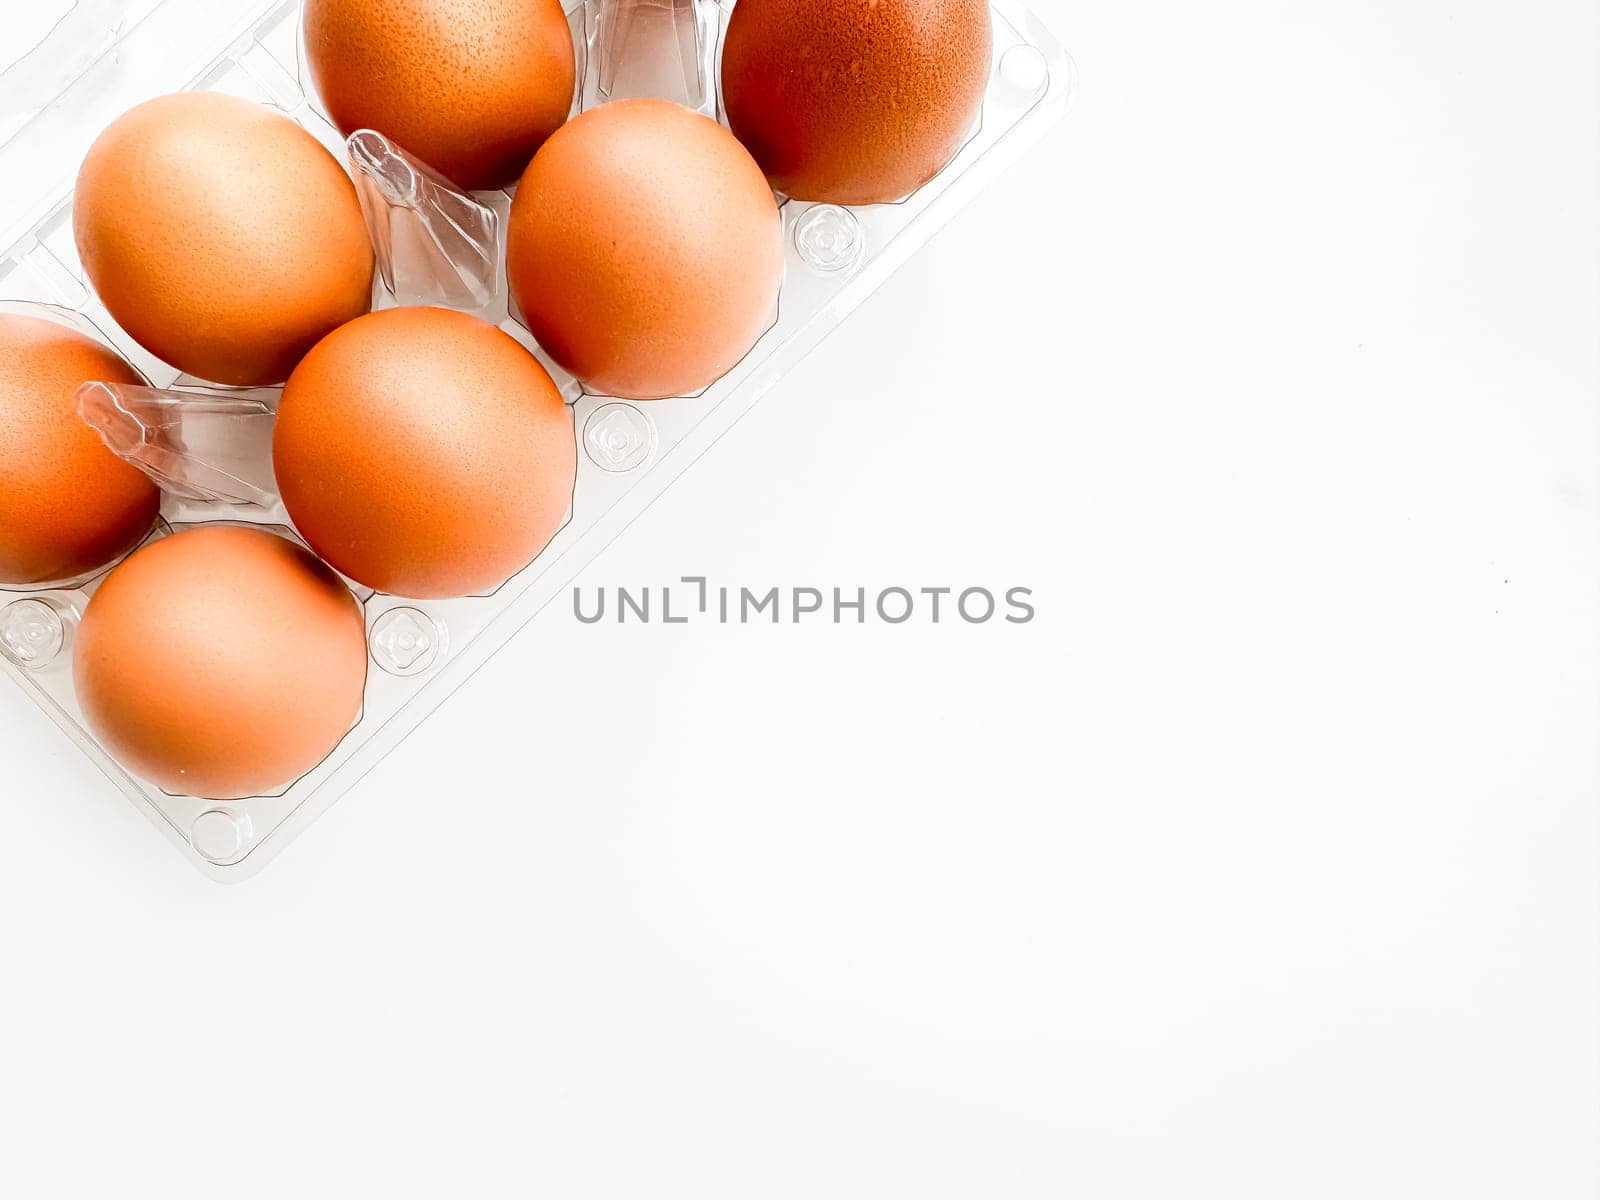 Brown eggs in transparent plastic carton on white background, top corner view. Concept of organic produce, breakfast essentials, and healthy eating with copy space. by Lunnica